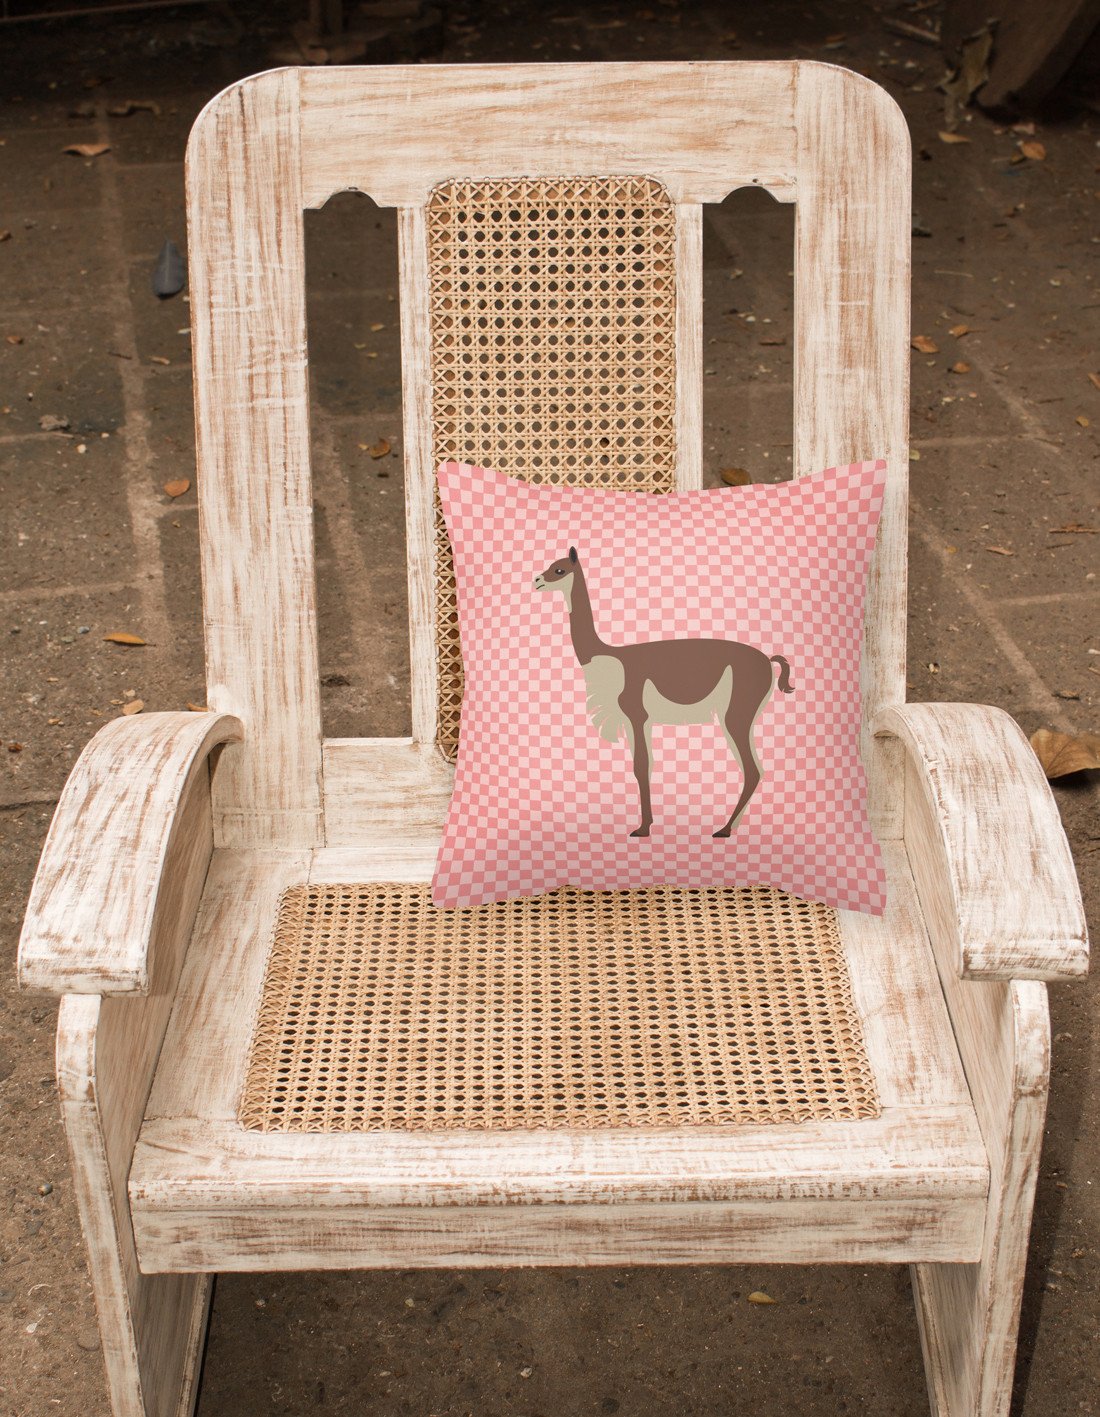 Vicugna or Vicuna Pink Check Fabric Decorative Pillow BB7917PW1818 by Caroline's Treasures